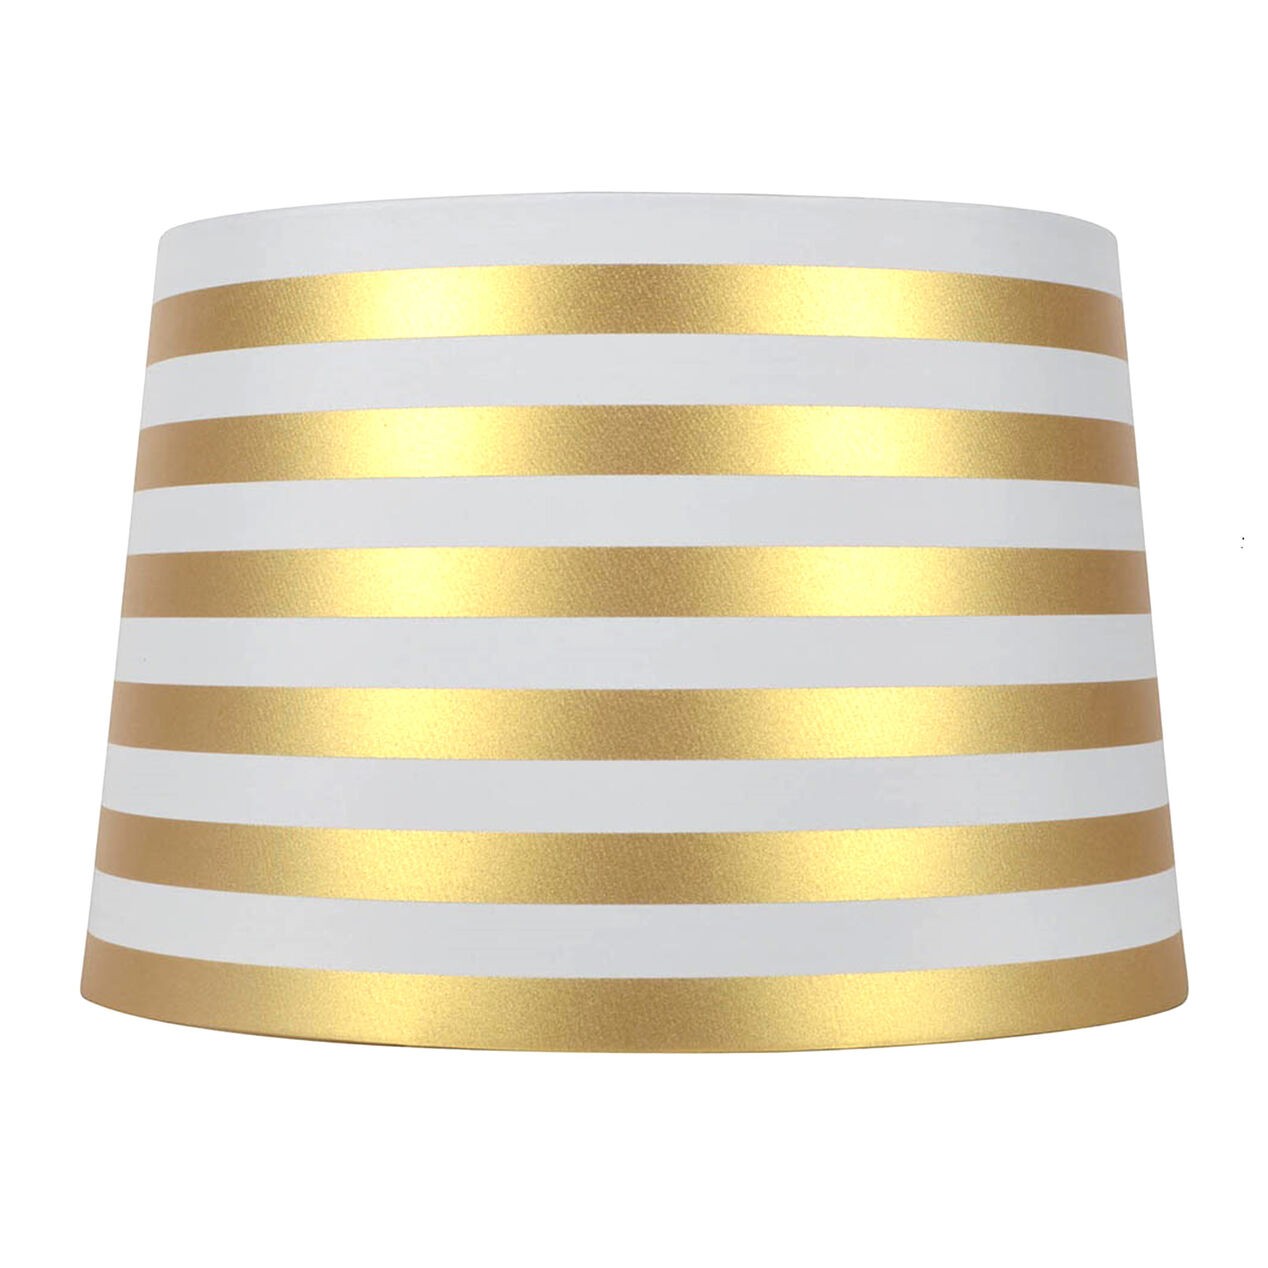 White and gold striped lamp shade 7x10x8 in at home